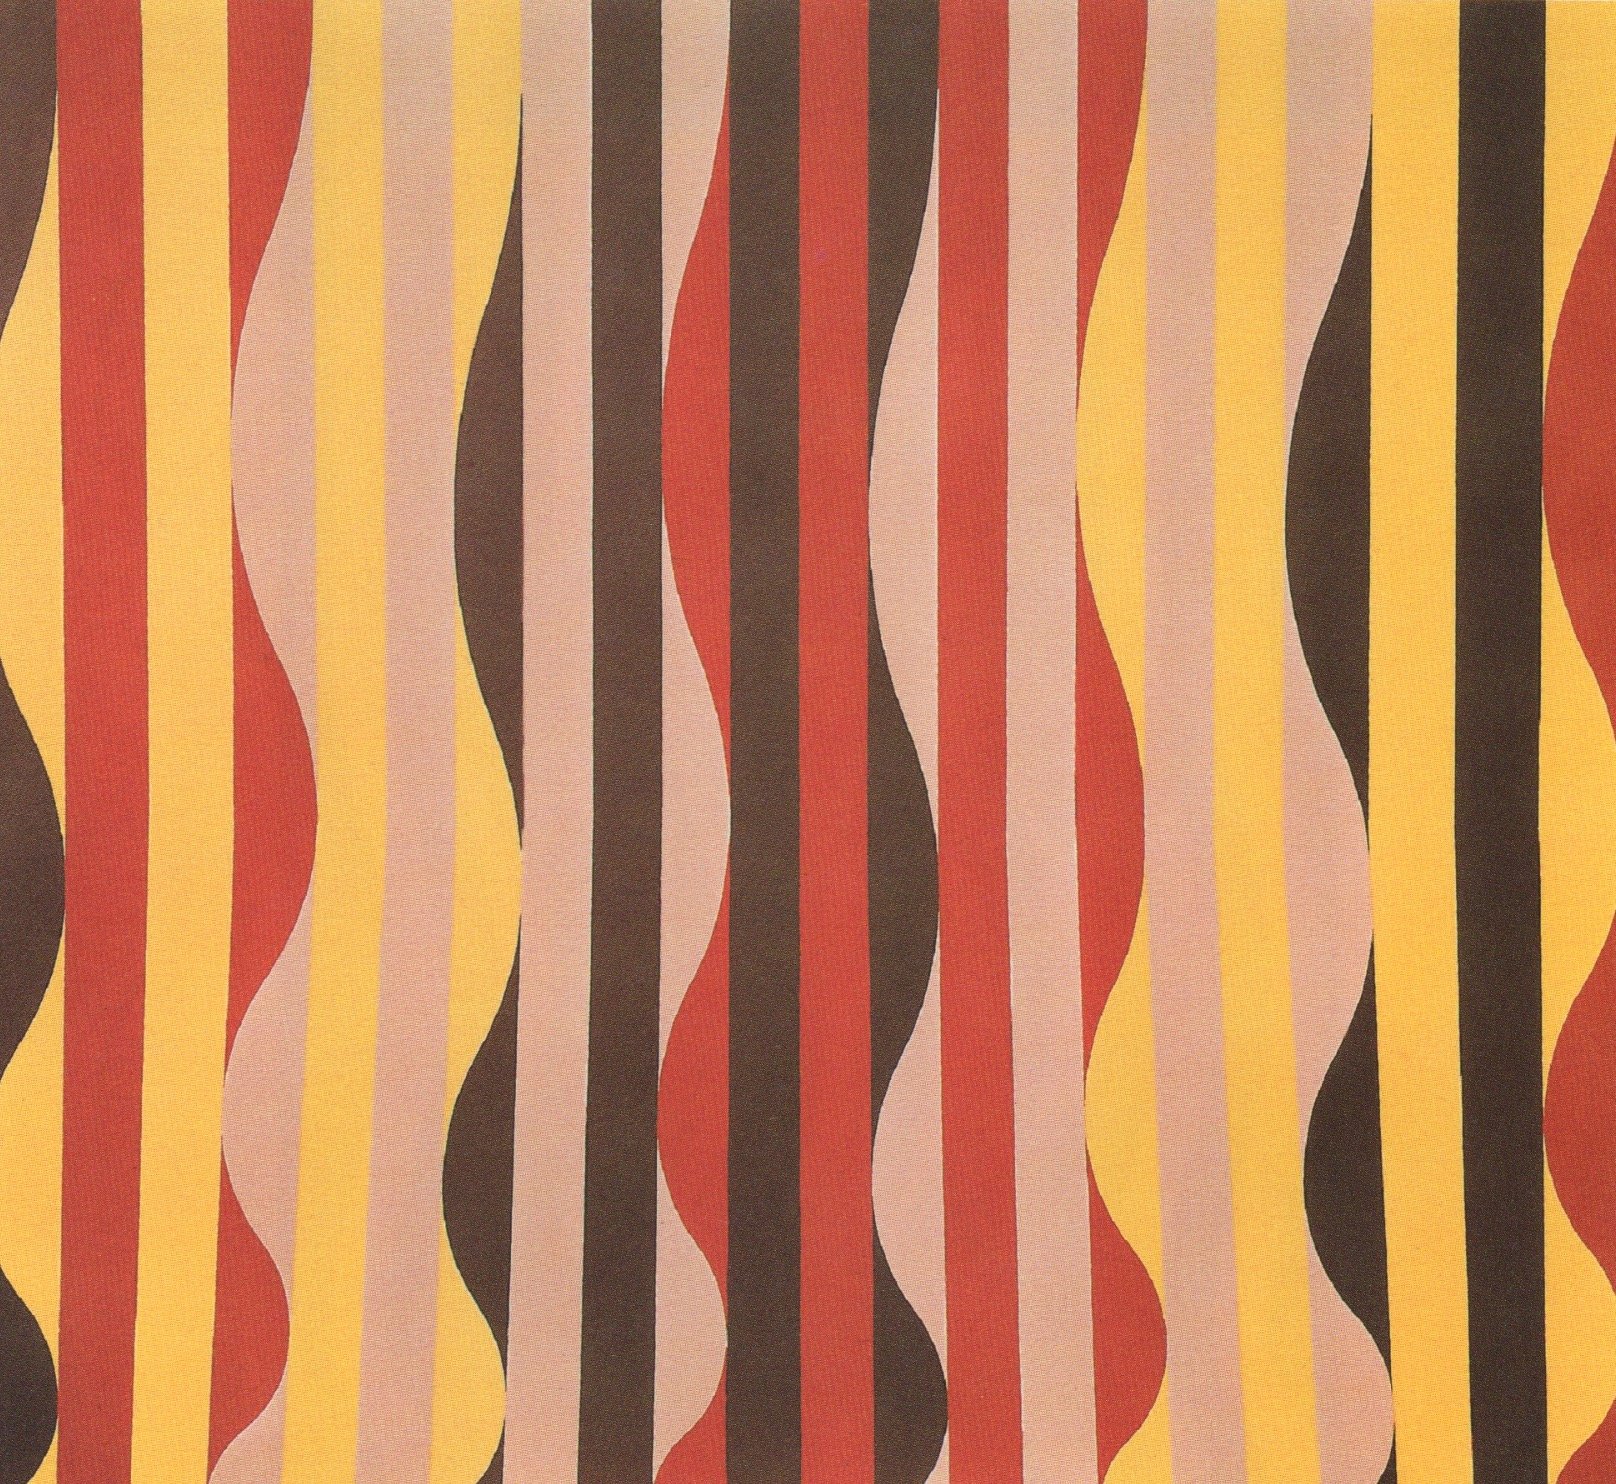 michael kidner, “red, green, yellow, grey” (1966), oil on canvas, 168 x 183 cm